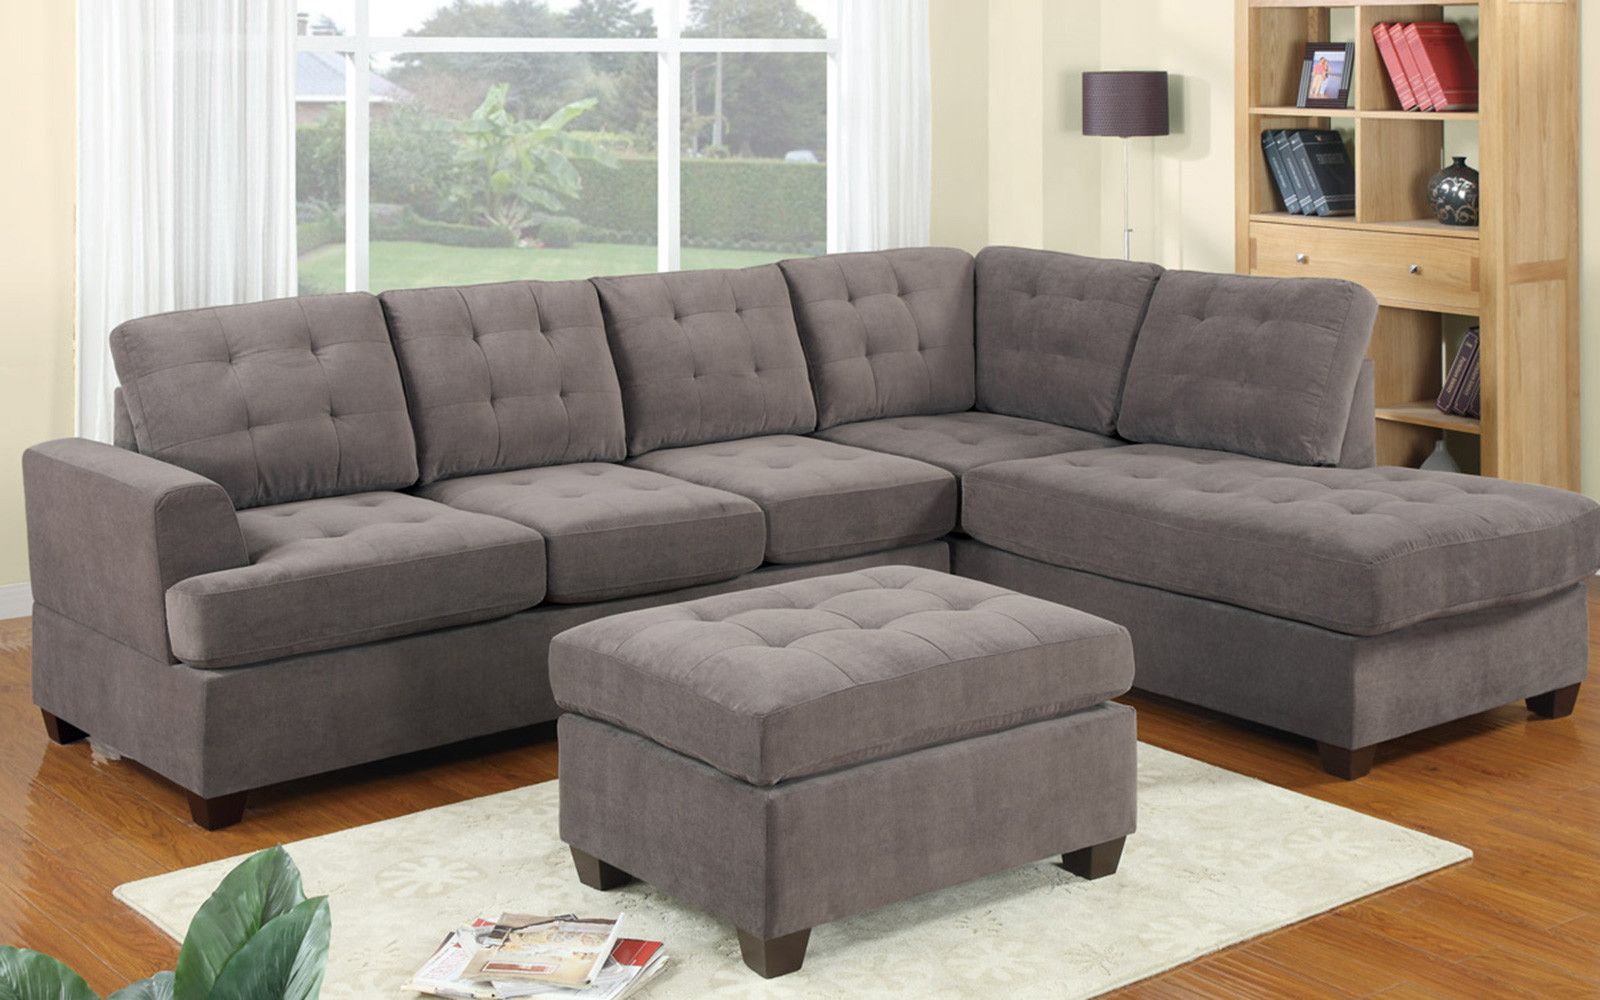 The Beauty Of Microfiber Sectional Sofa – Decorifusta Inside Microfiber Sectional Corner Sofas (View 10 of 20)